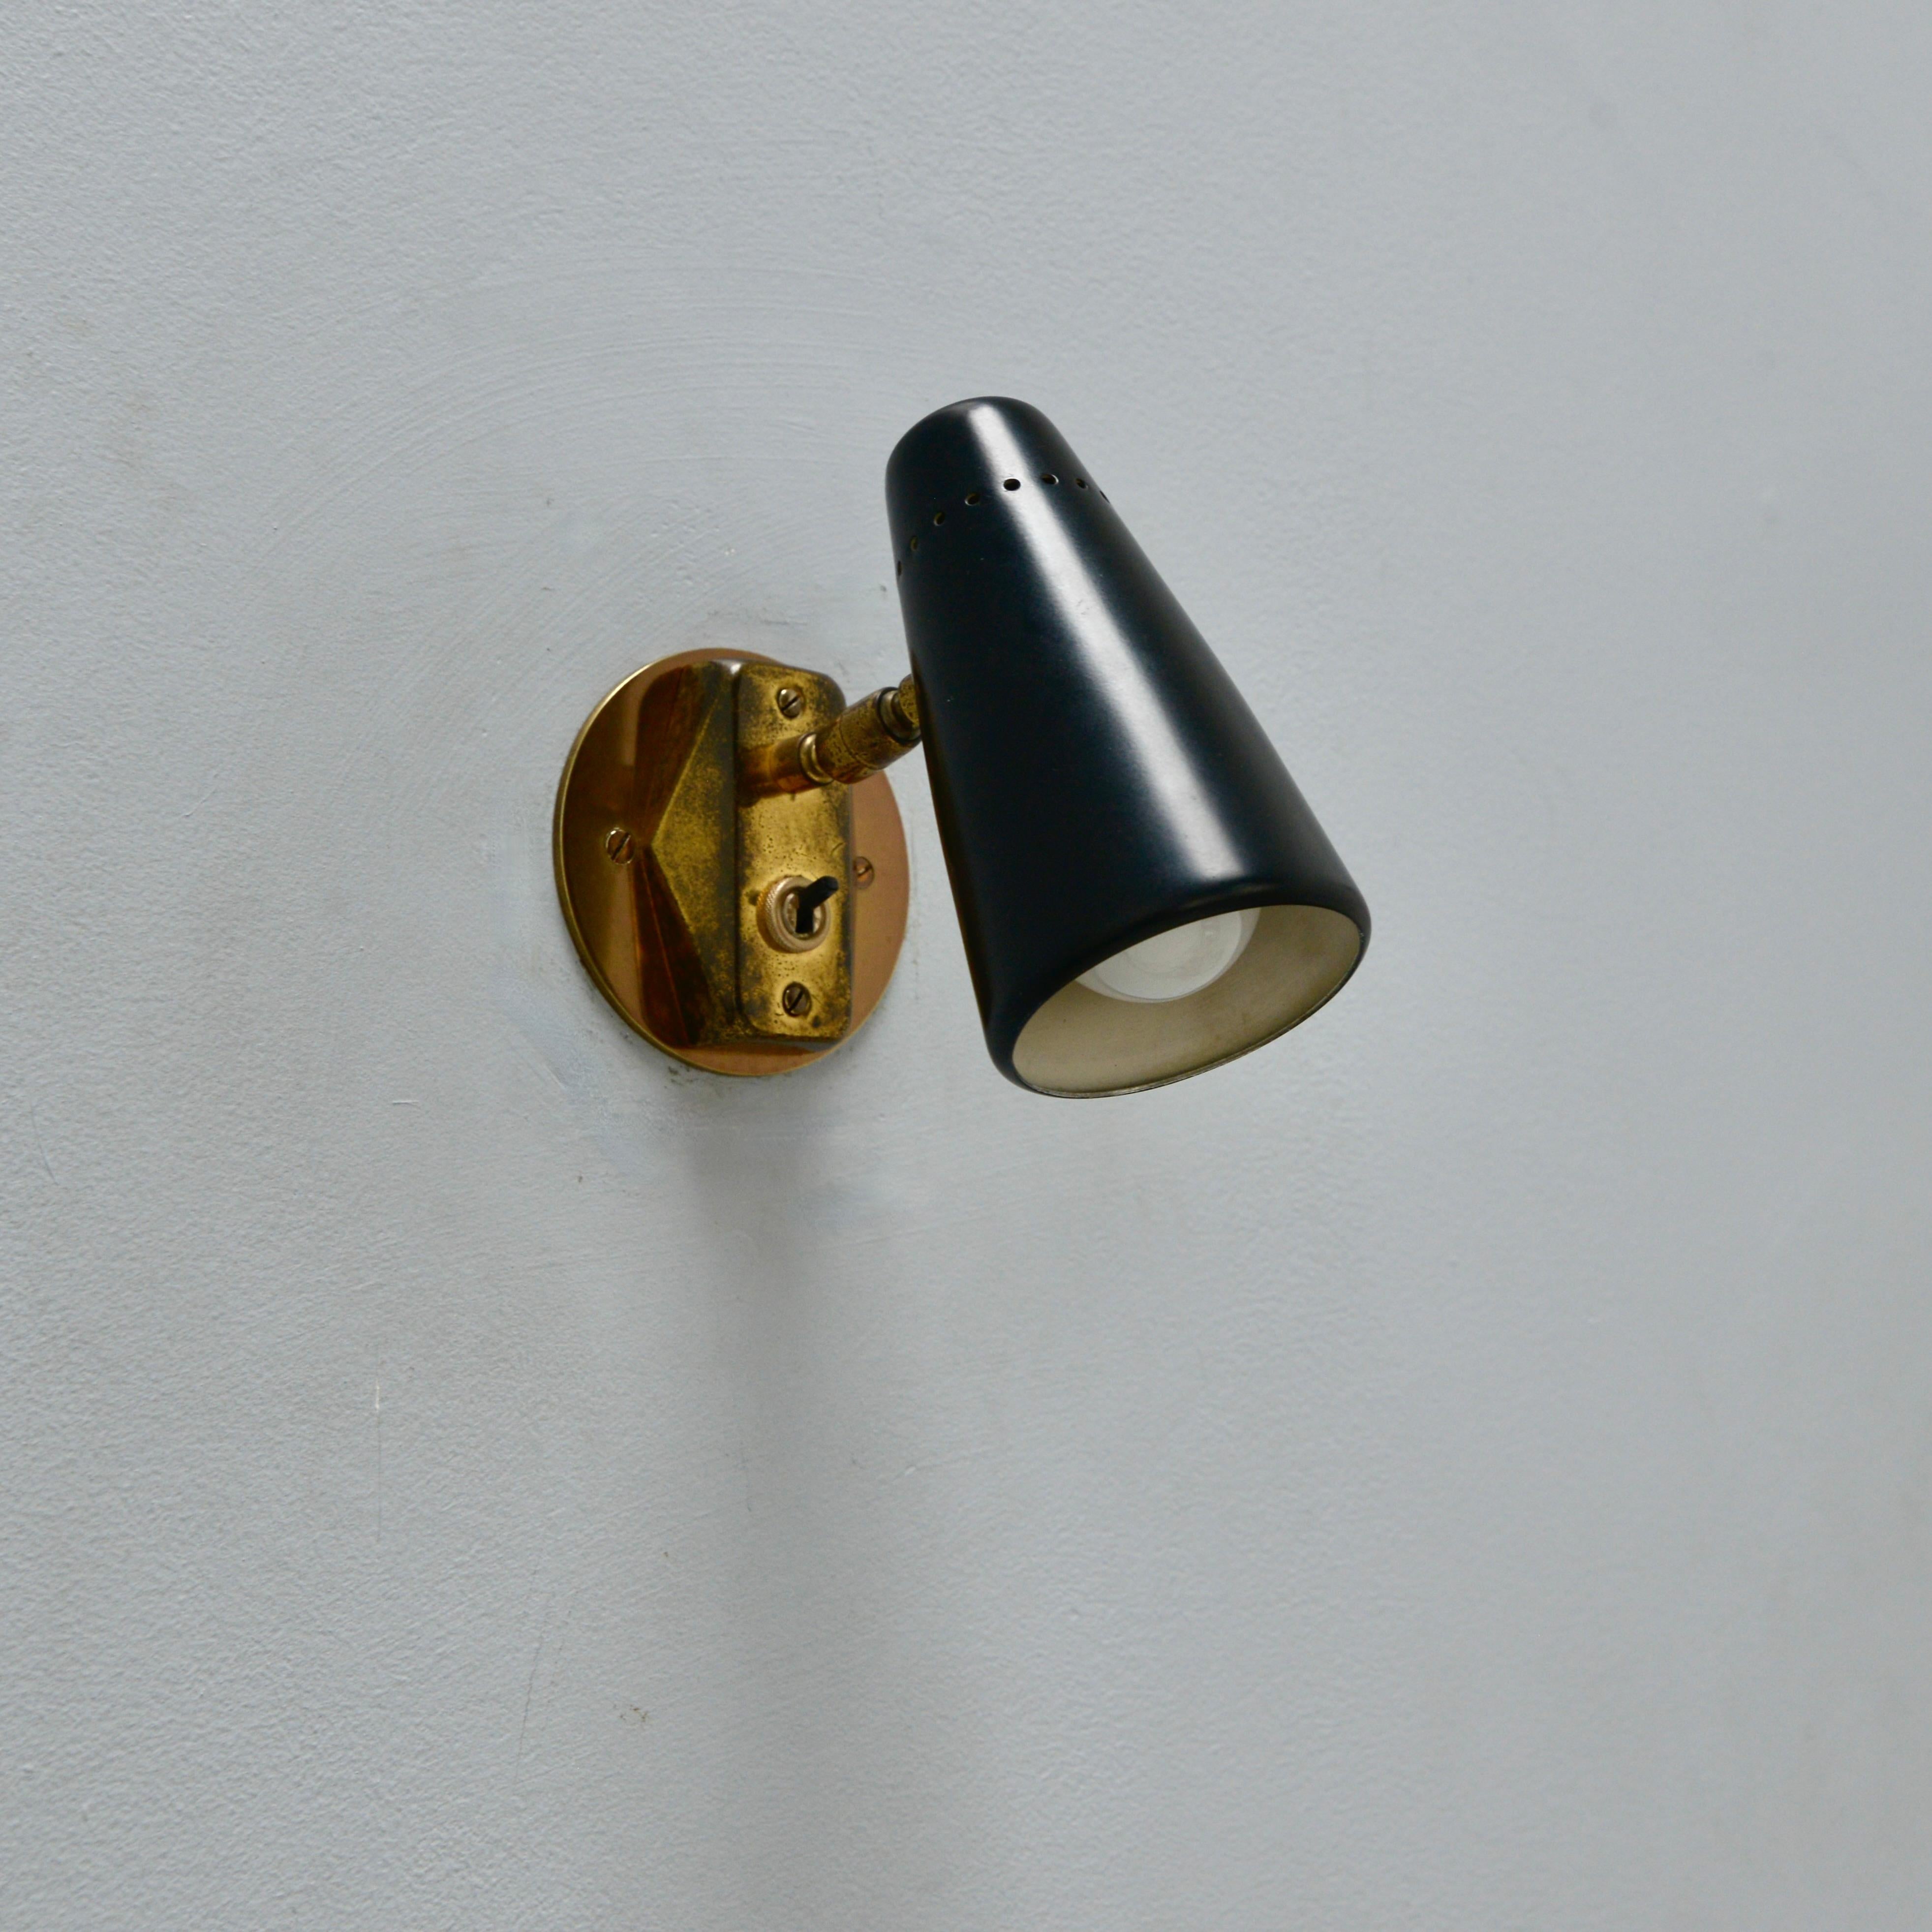 Classic midcentury Italian Directional spot wall sconce from Stilnovo from the 1950s in aged brass and painted aluminum. Partially restored. 1 E12 candelabra based socket for use in the USA. It can also be wired for use anywhere in the world.